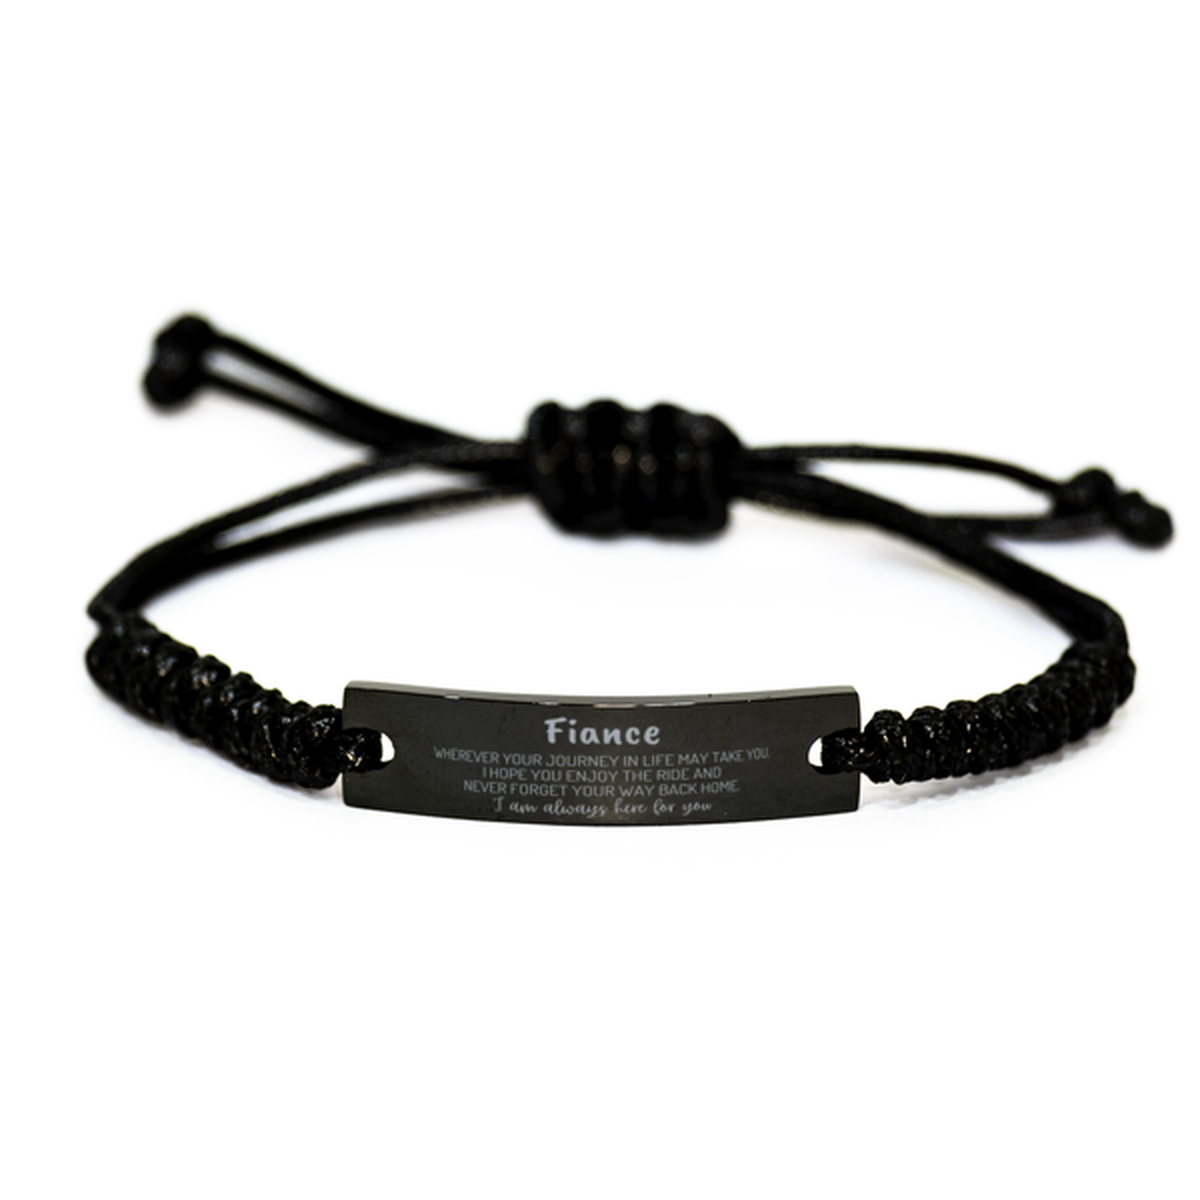 Fiance wherever your journey in life may take you, I am always here for you Fiance Black Rope Bracelet, Awesome Christmas Gifts For Fiance, Fiance Birthday Gifts for Men Women Family Loved One